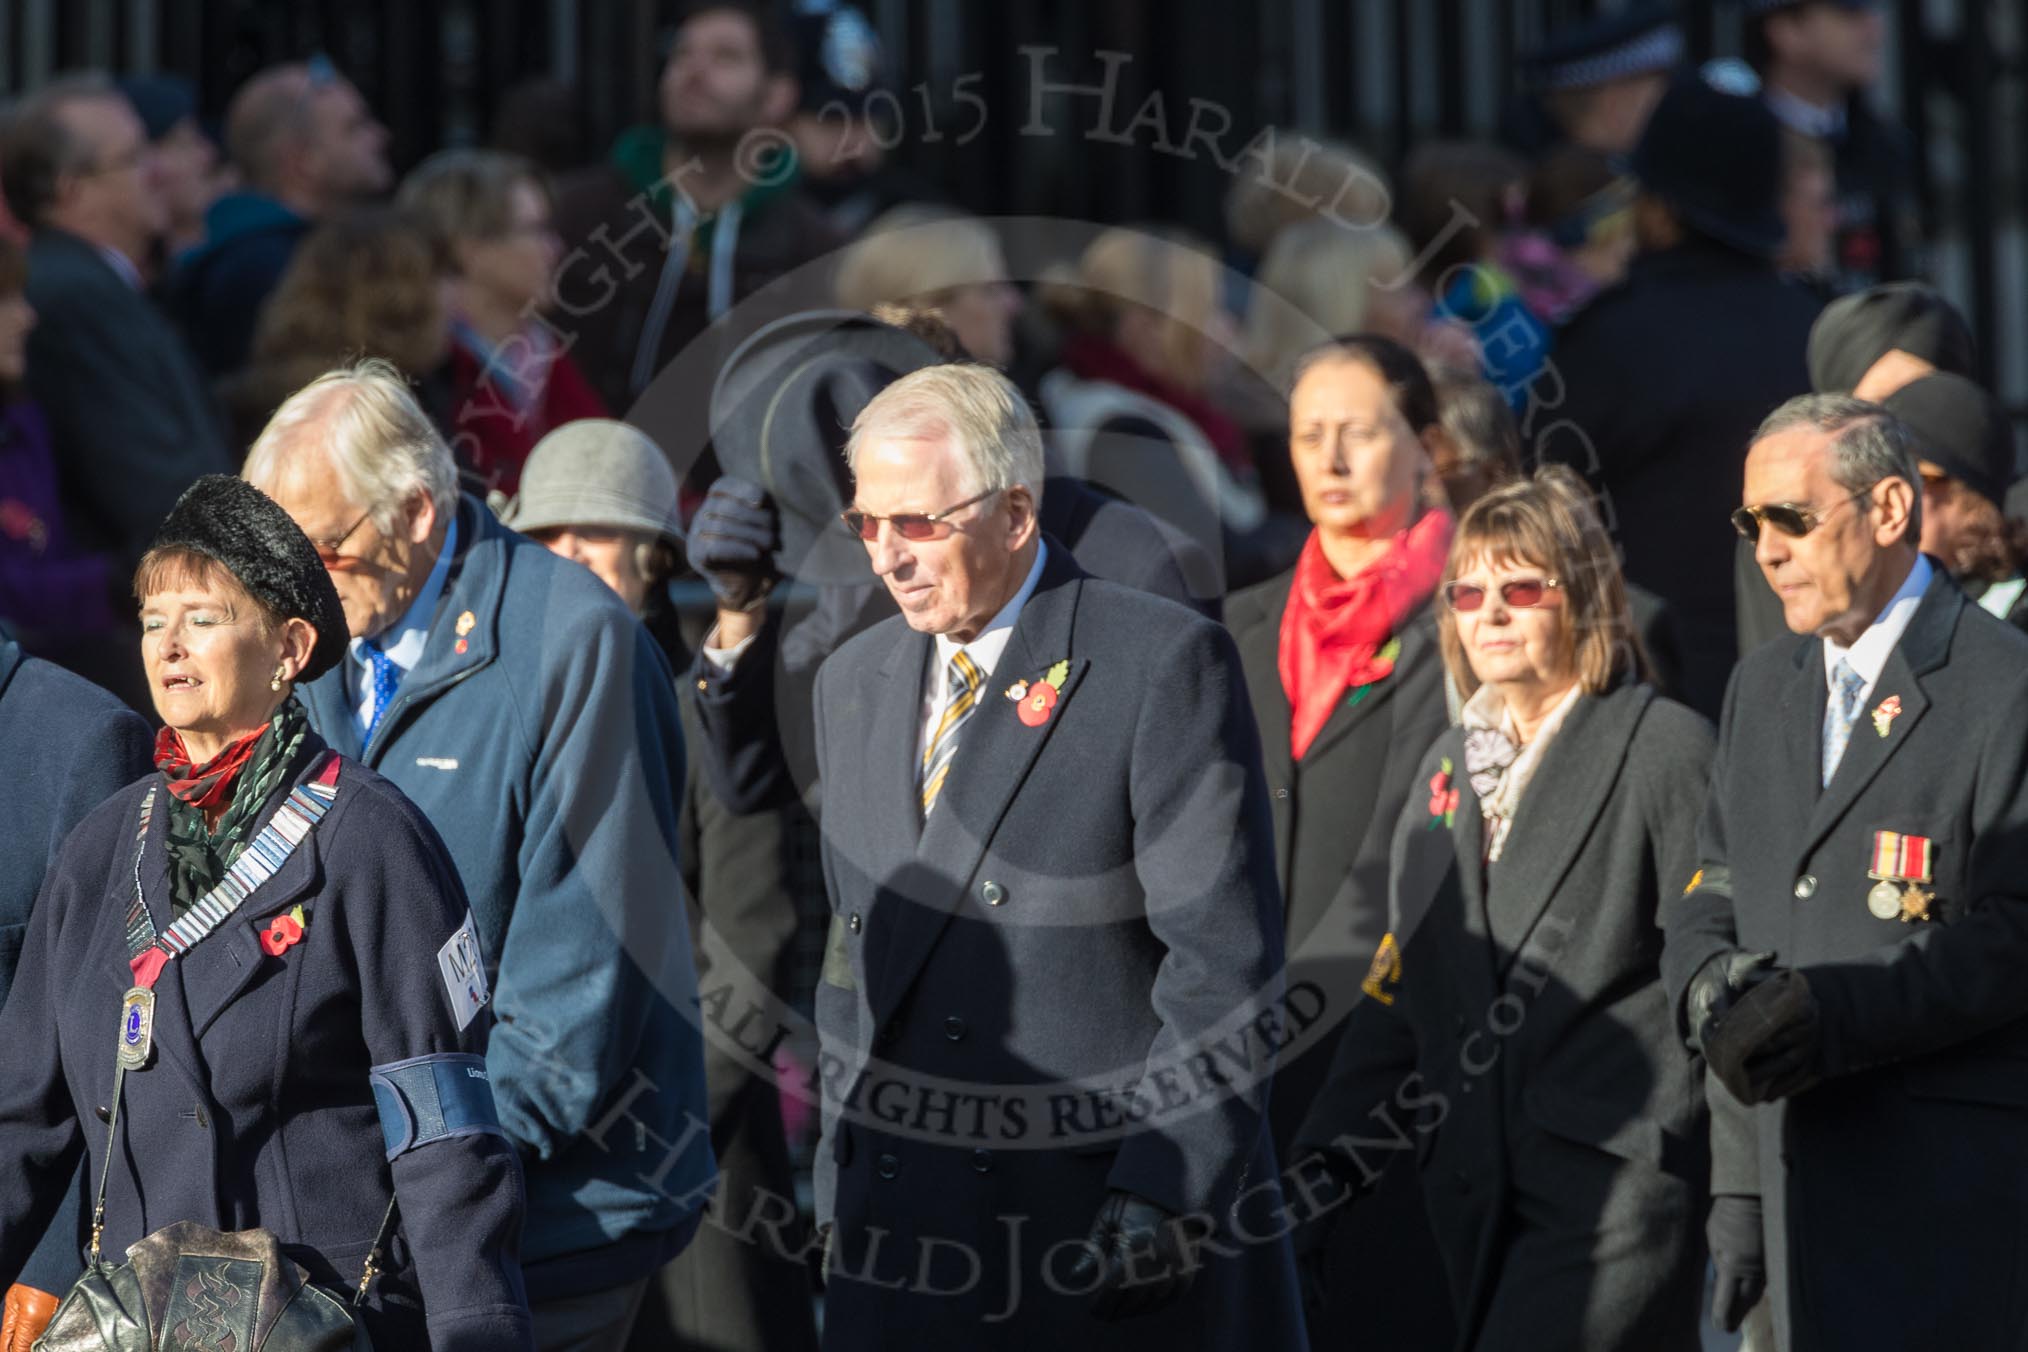 March Past, Remembrance Sunday at the Cenotaph 2016: M28 Lions Club International.
Cenotaph, Whitehall, London SW1,
London,
Greater London,
United Kingdom,
on 13 November 2016 at 13:17, image #2737